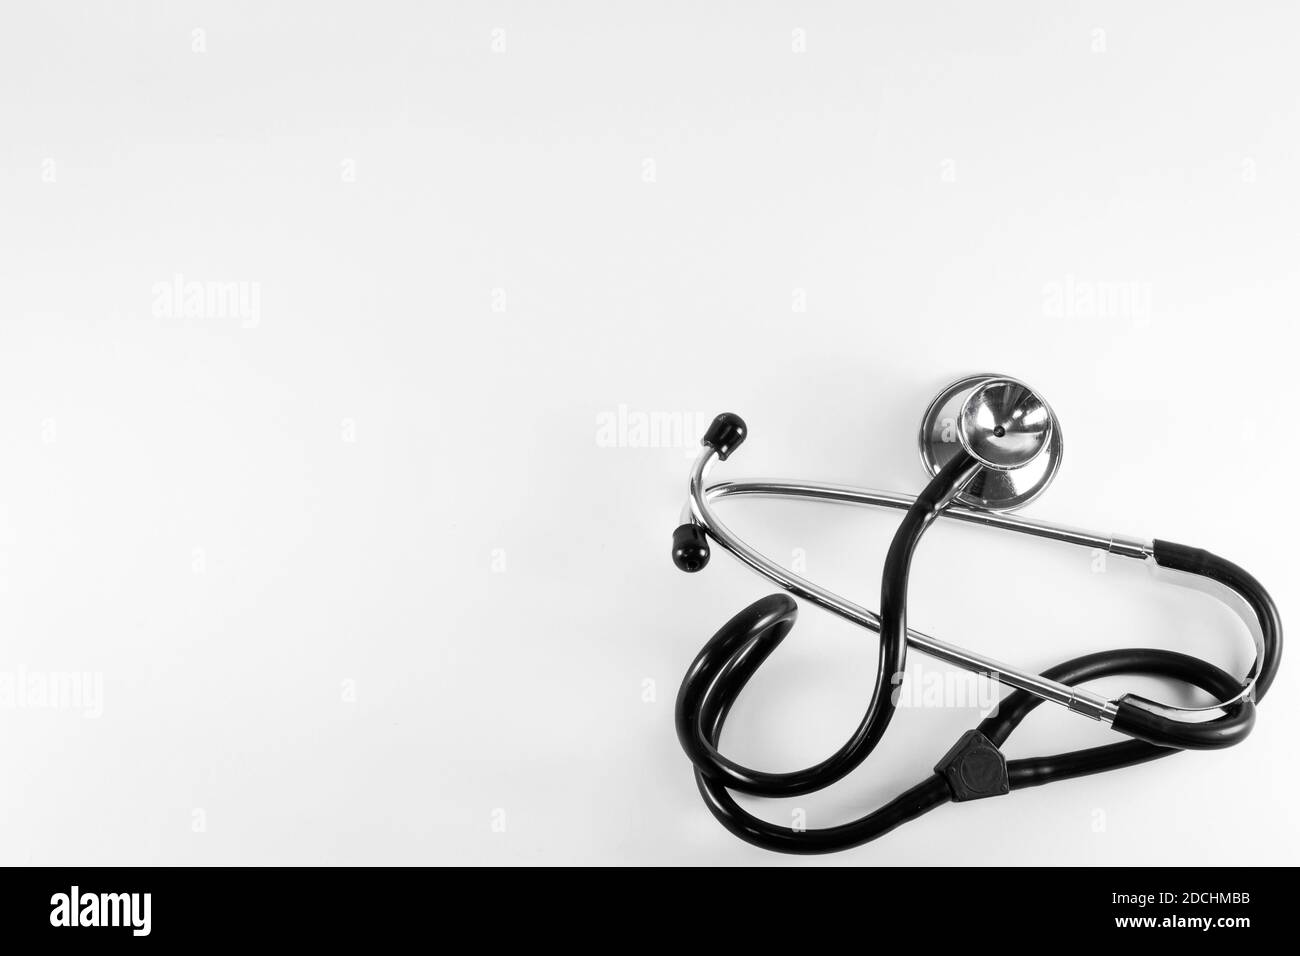 Isolated stethoscope phonendoscope on white background. Device for listening to the lungs and heartbeat. Medical instruments, top view, copy space. Stock Photo